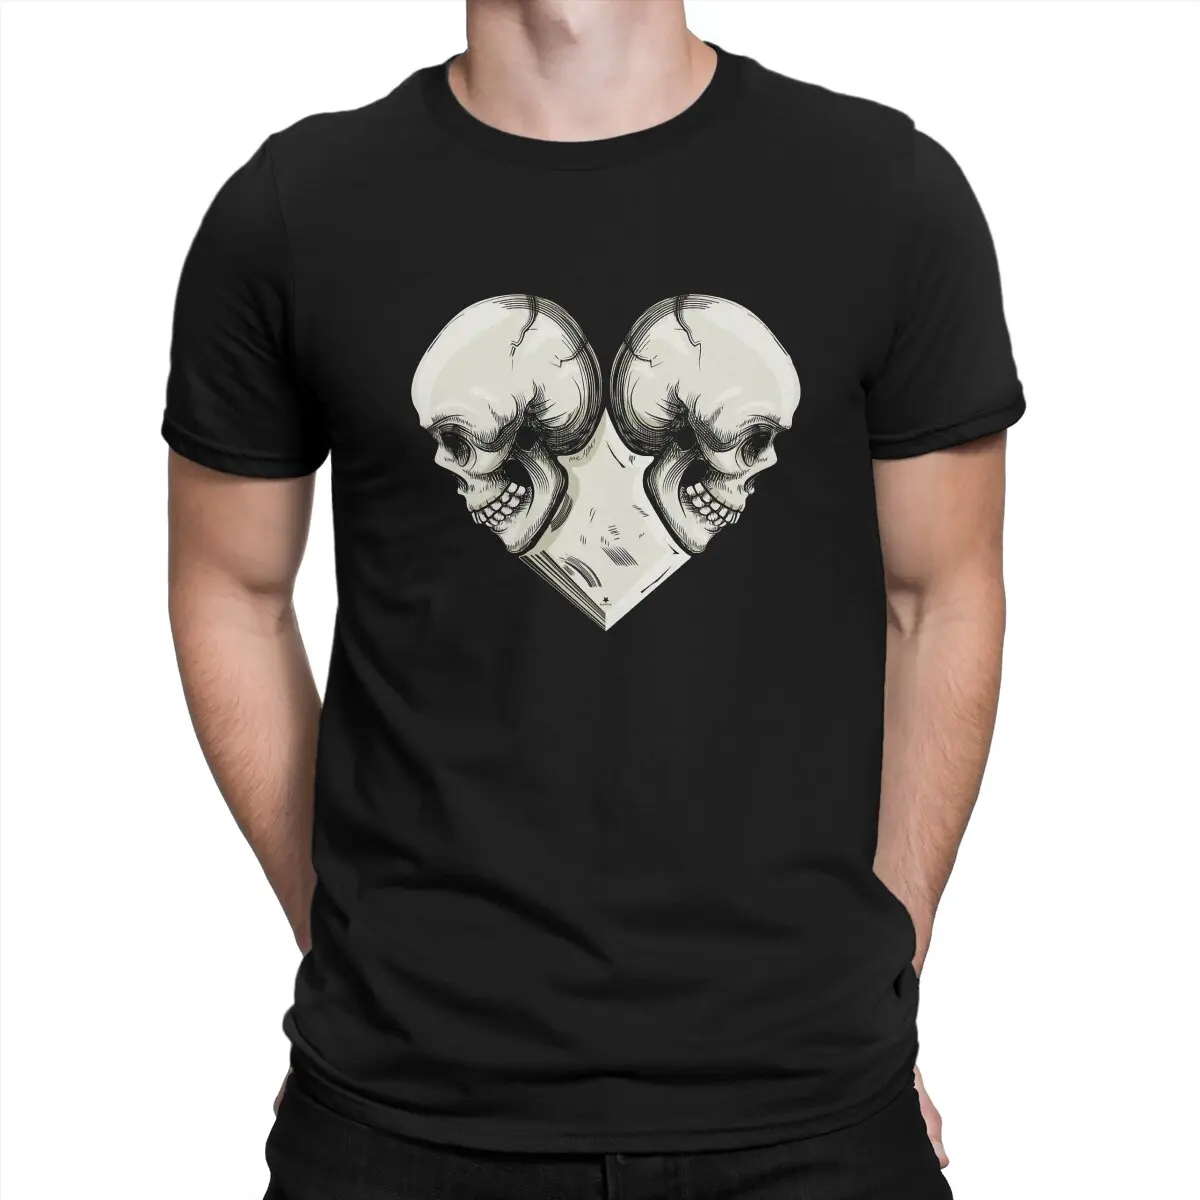 

Black Metal Newest TShirt for Men Skulls Heart Love Round Collar Pure Cotton T Shirt Personalize Gift Clothes OutdoorWear